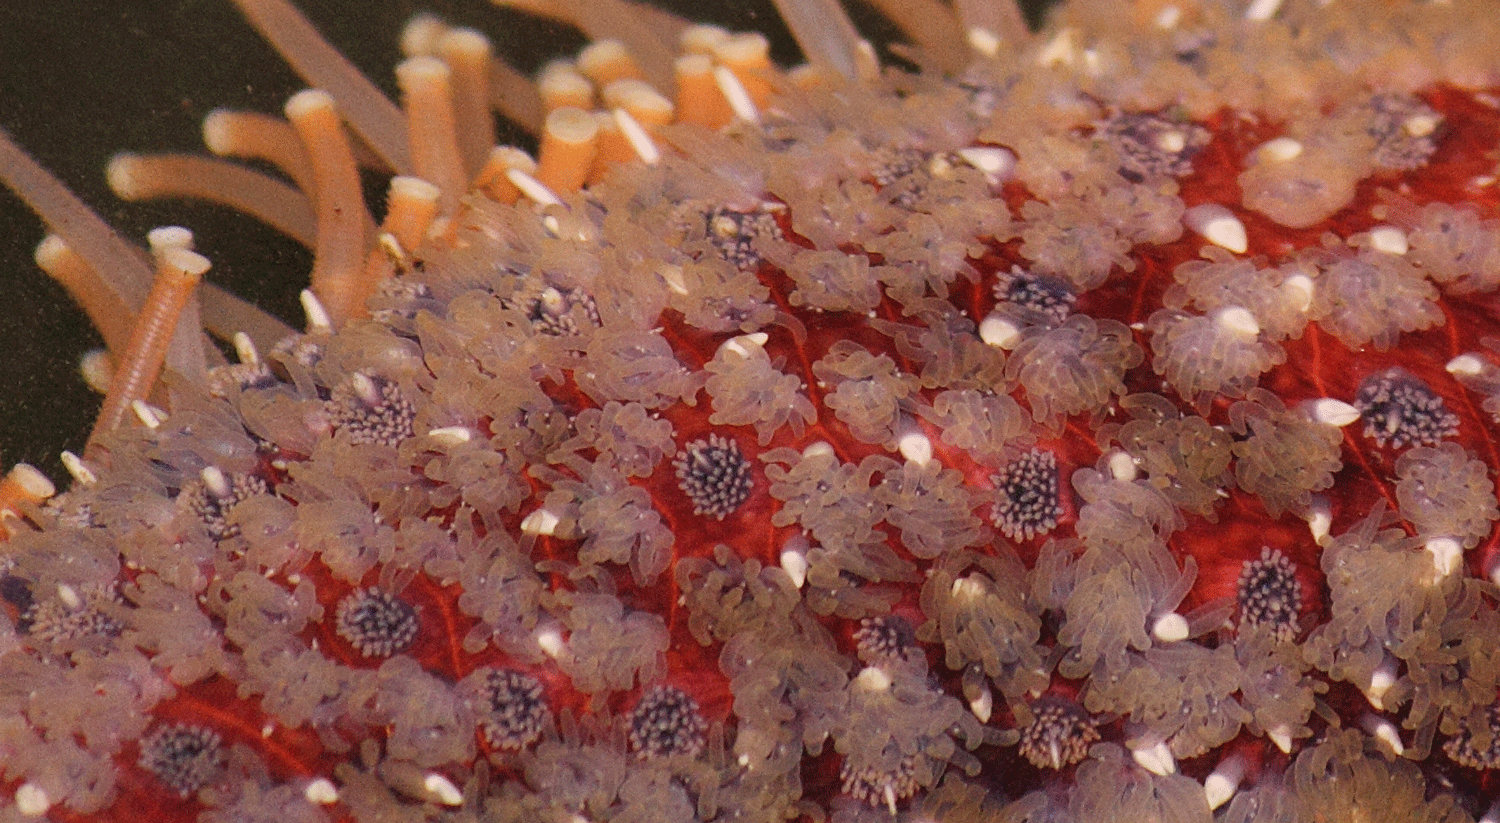 Closeup of the skin of a sunflower seastar leg. Its feet are in the background.